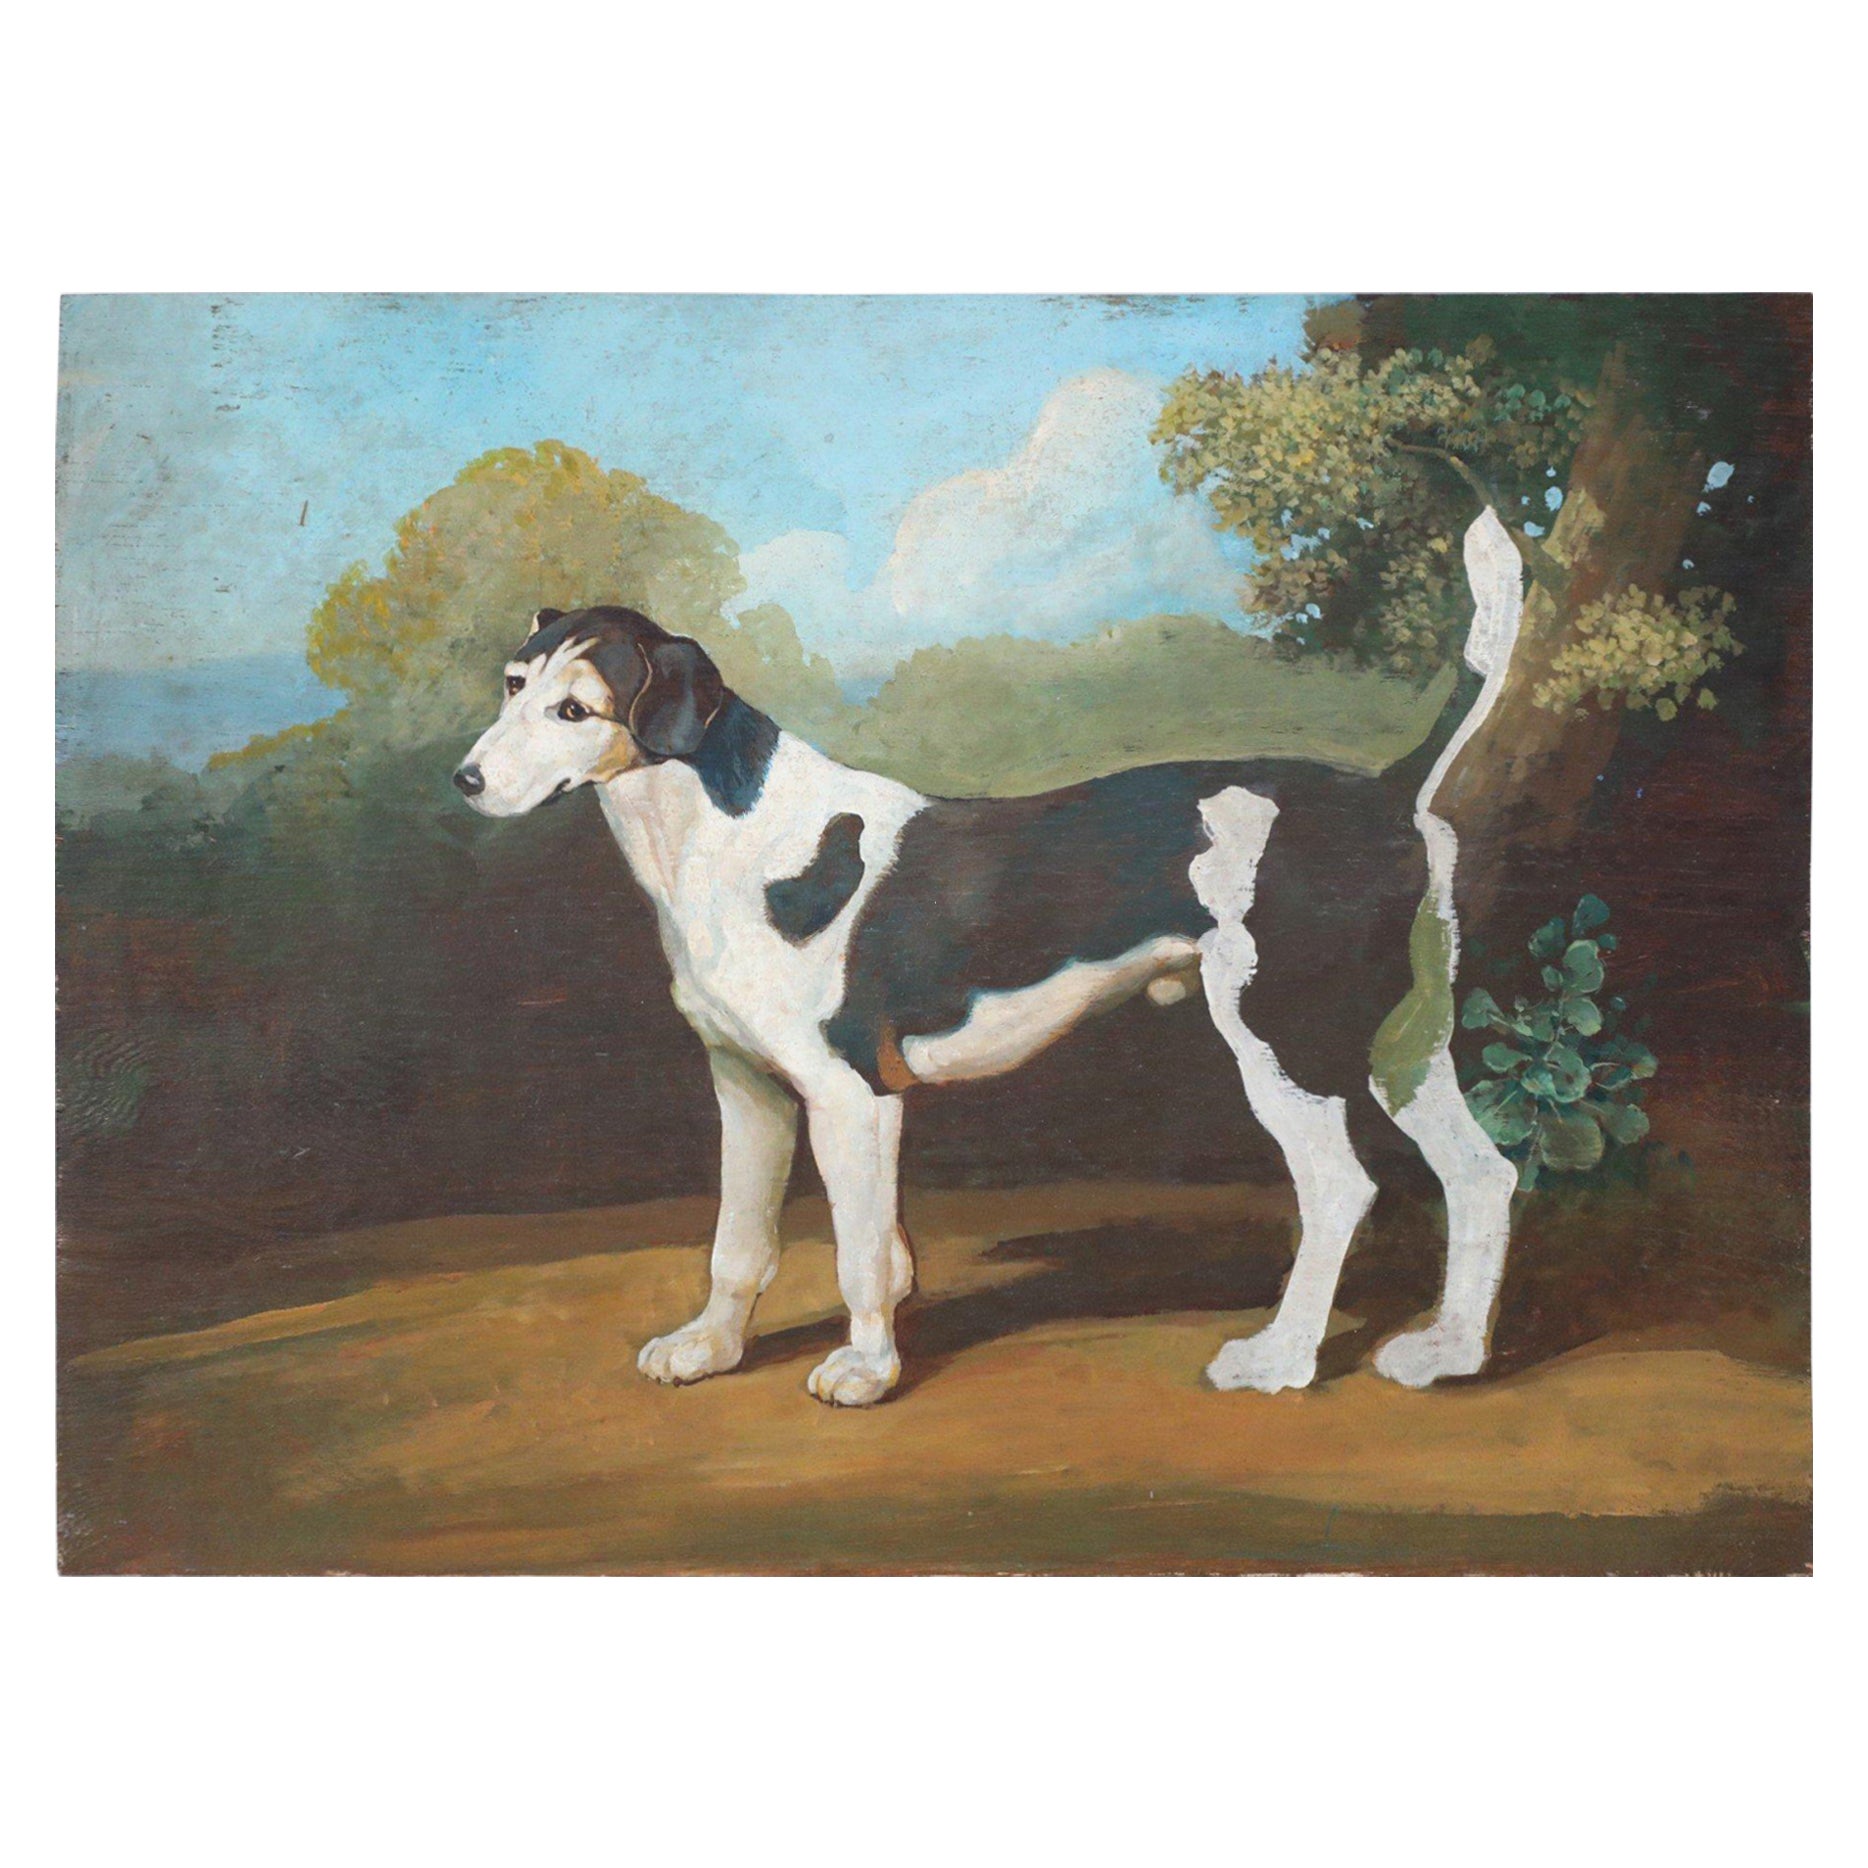 Black and White Dog Portrait Painting on Wood